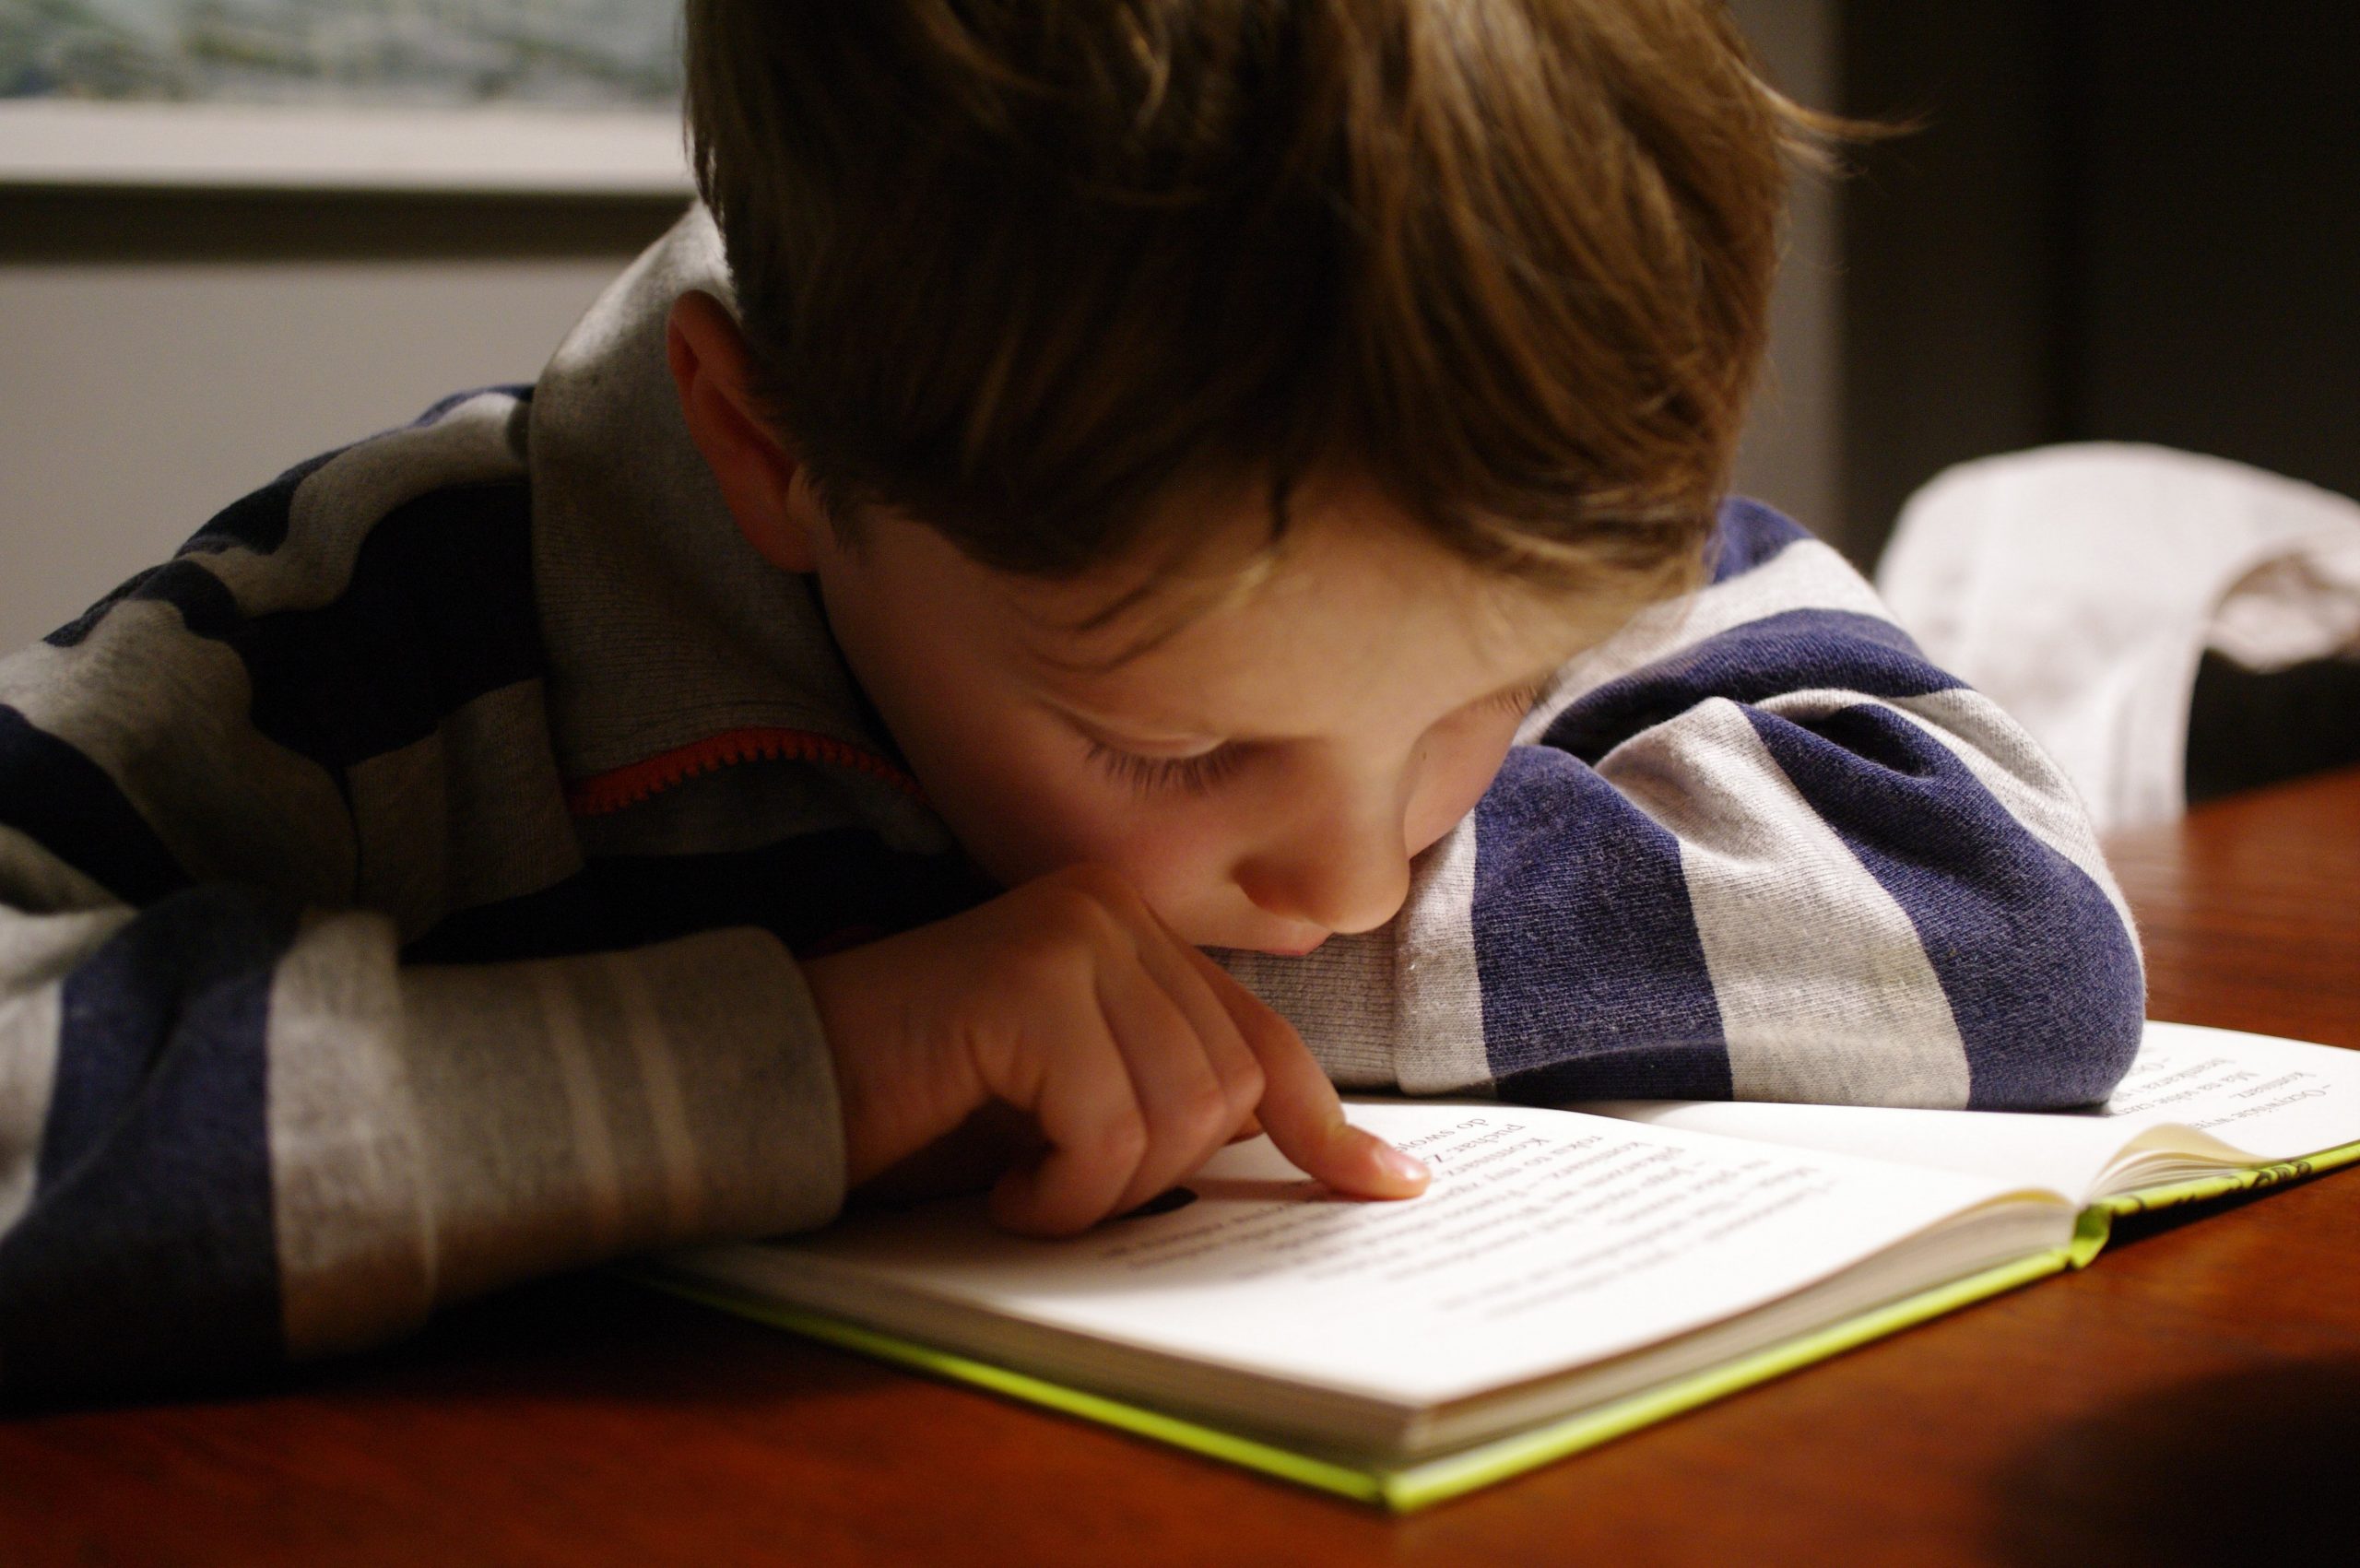 New research suggests reading to kids may boost resilience